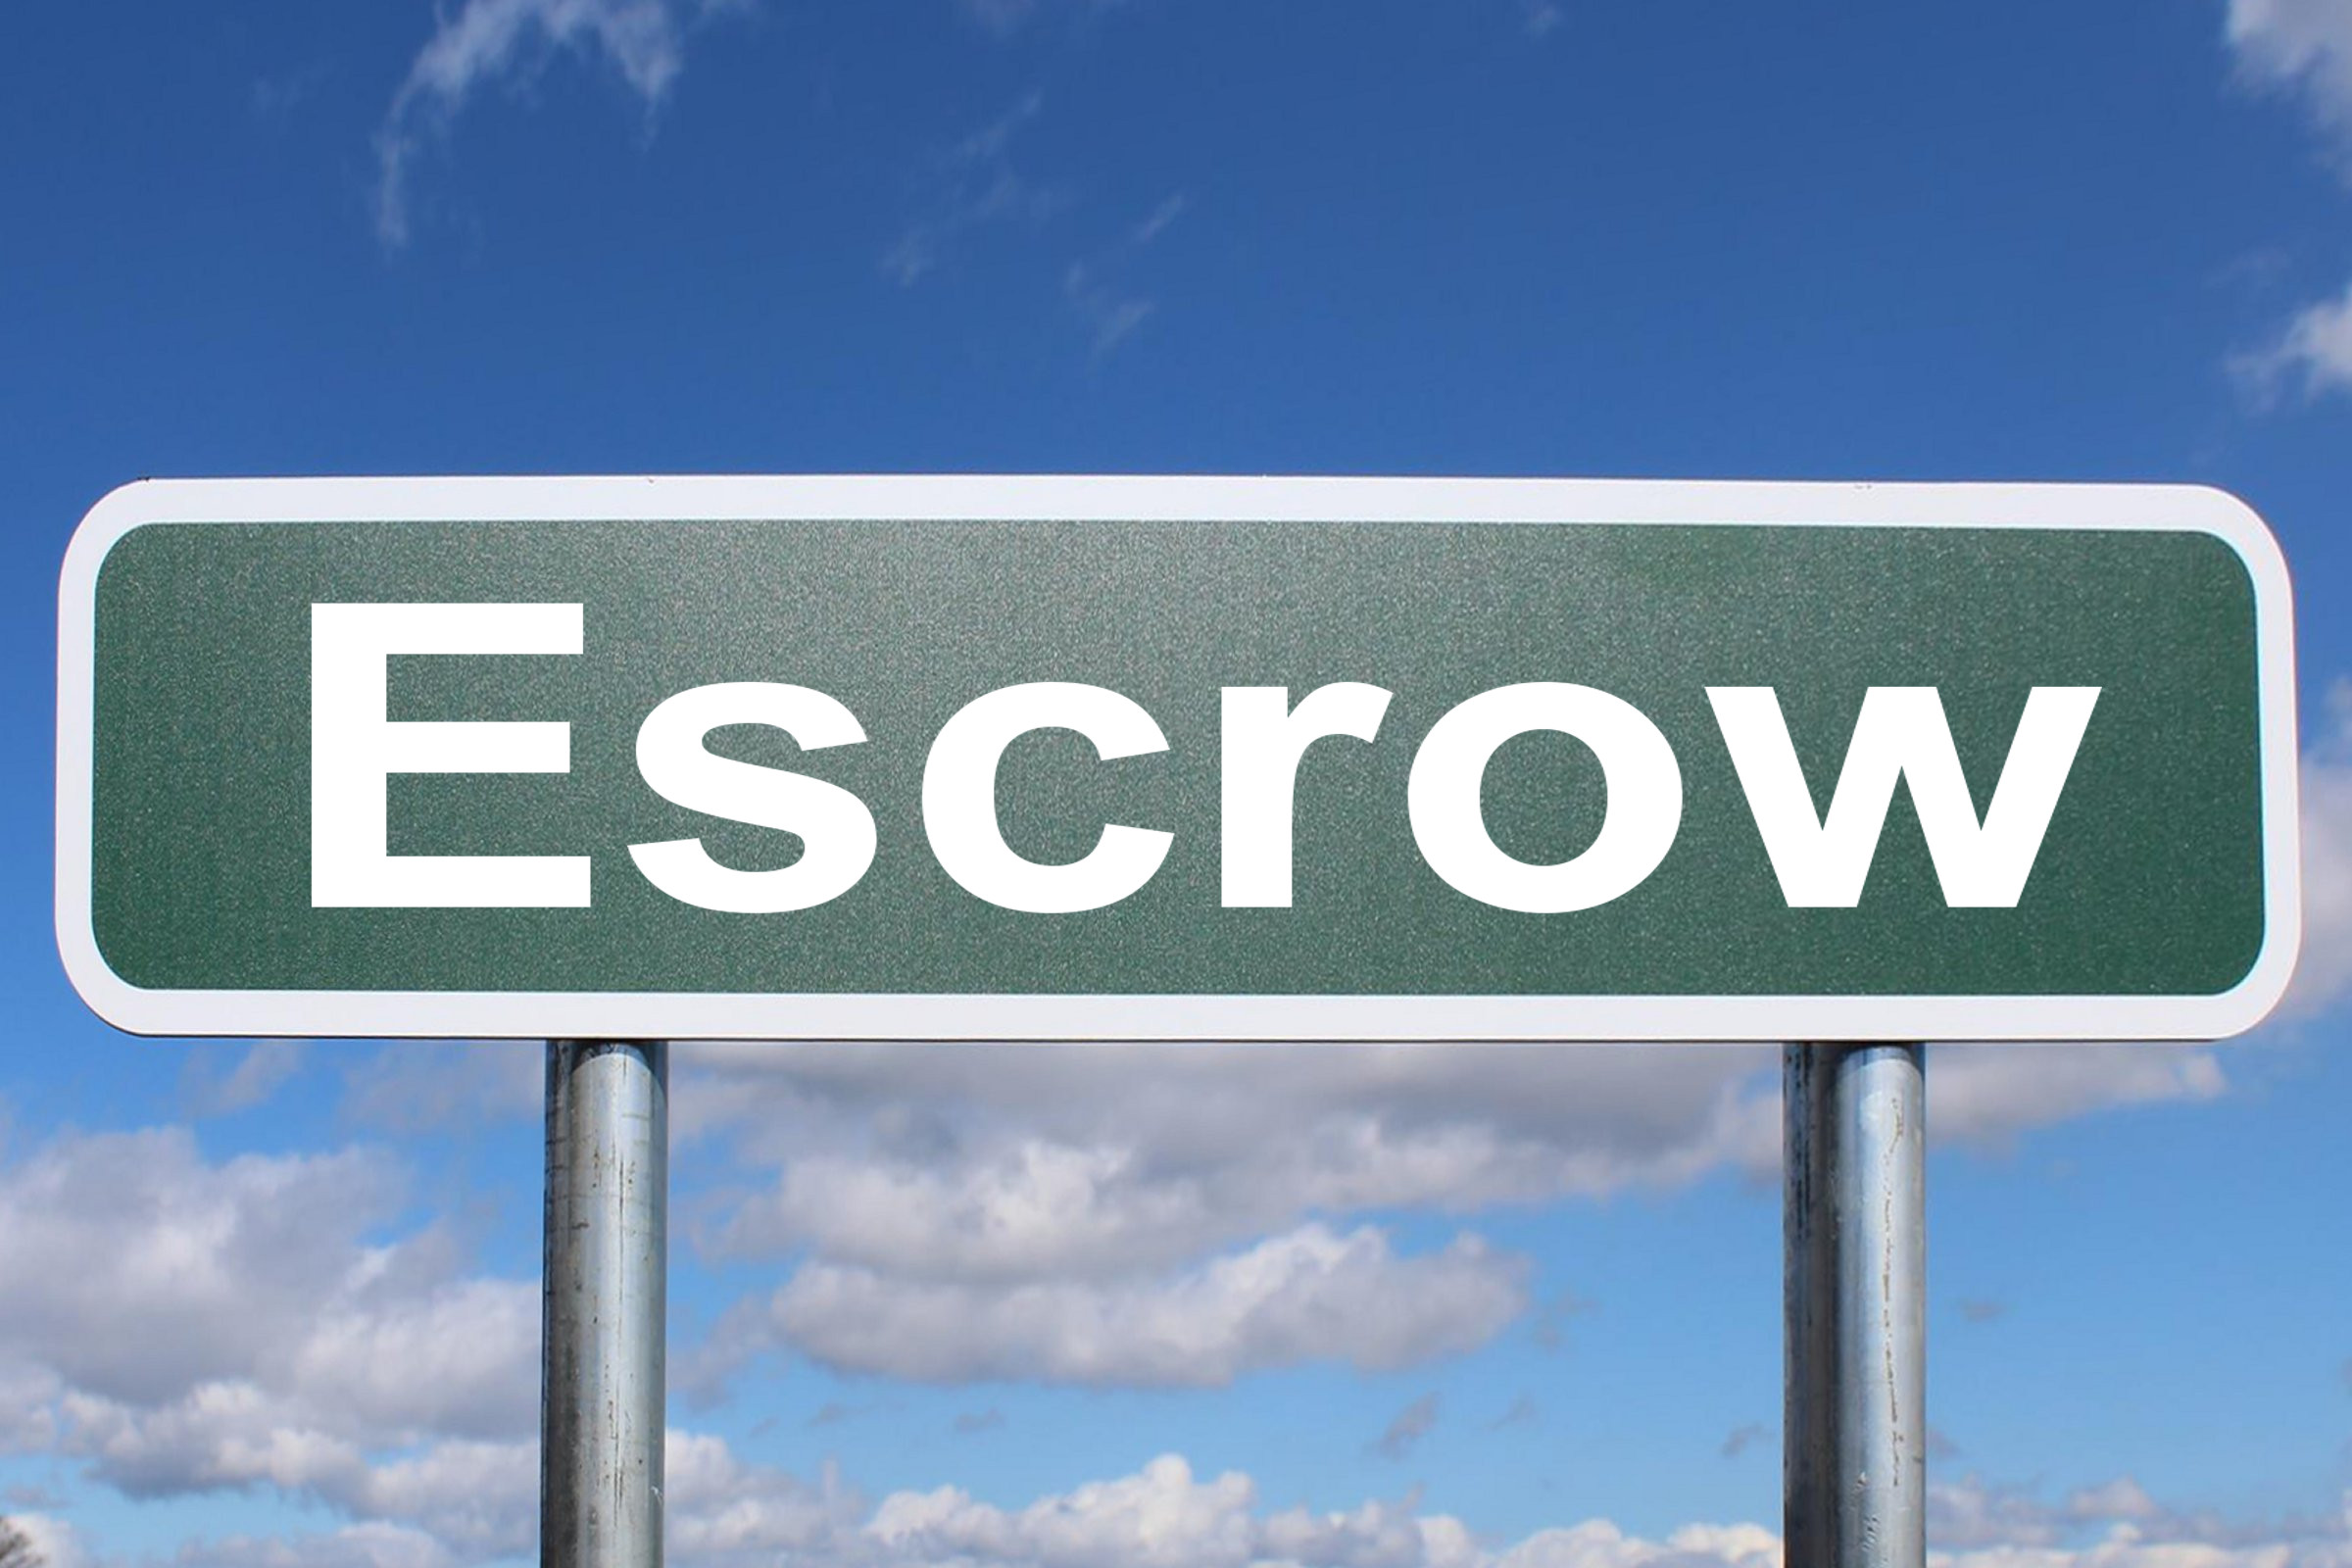 Escrow Free Of Charge Creative Commons Highway Sign Image